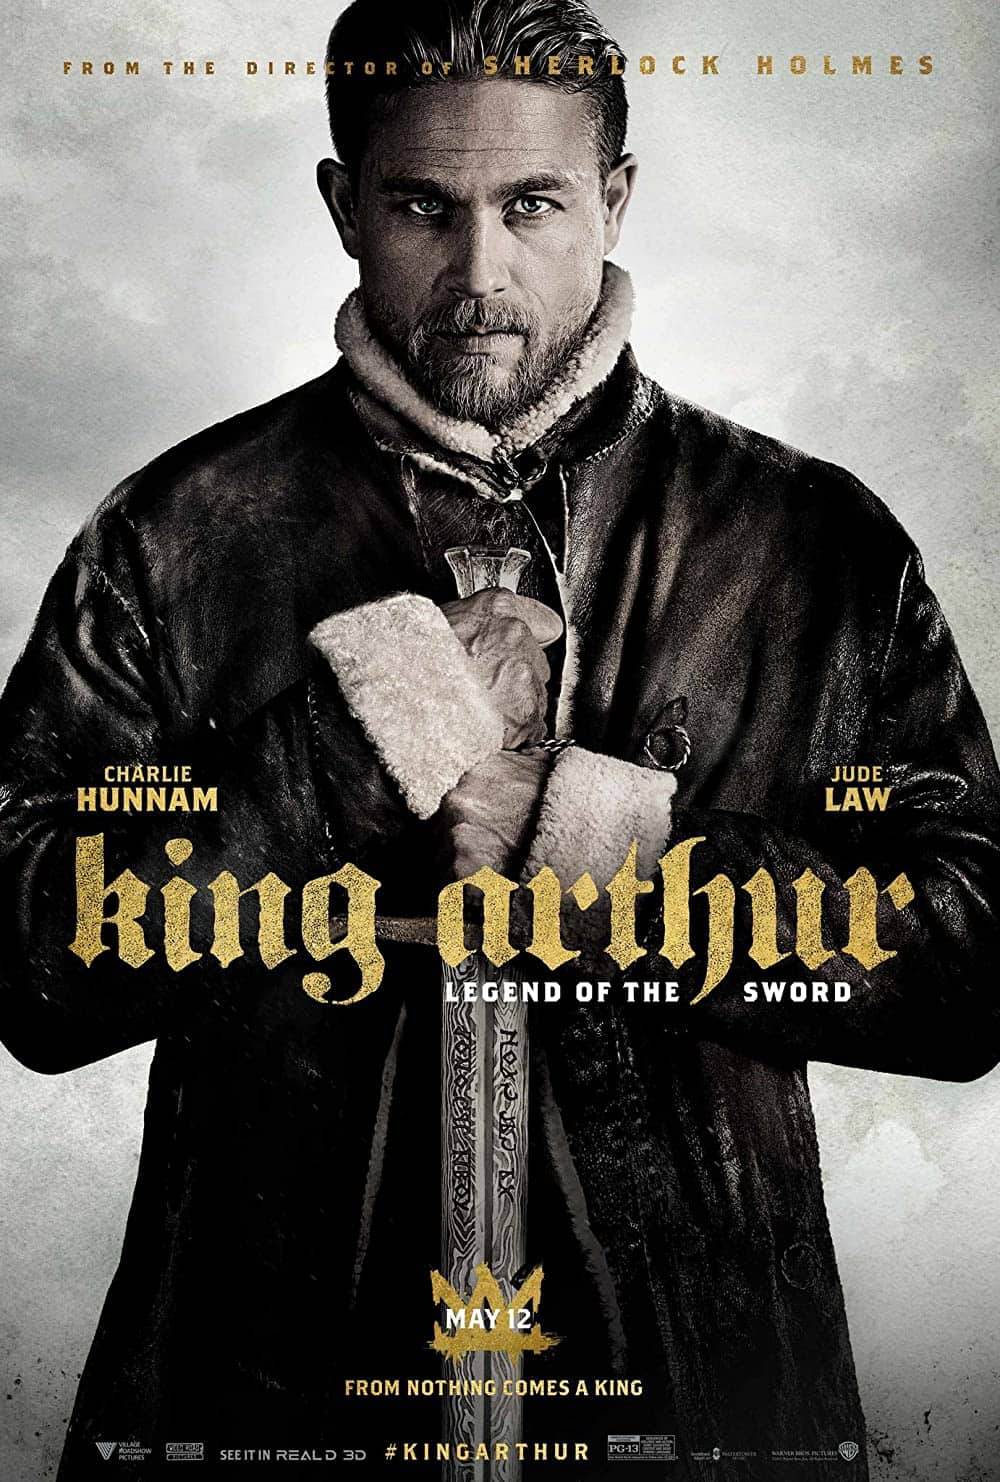 King Arthur Legend of the Sword (2017) Best Knight Movies to Add in Your Watchlist